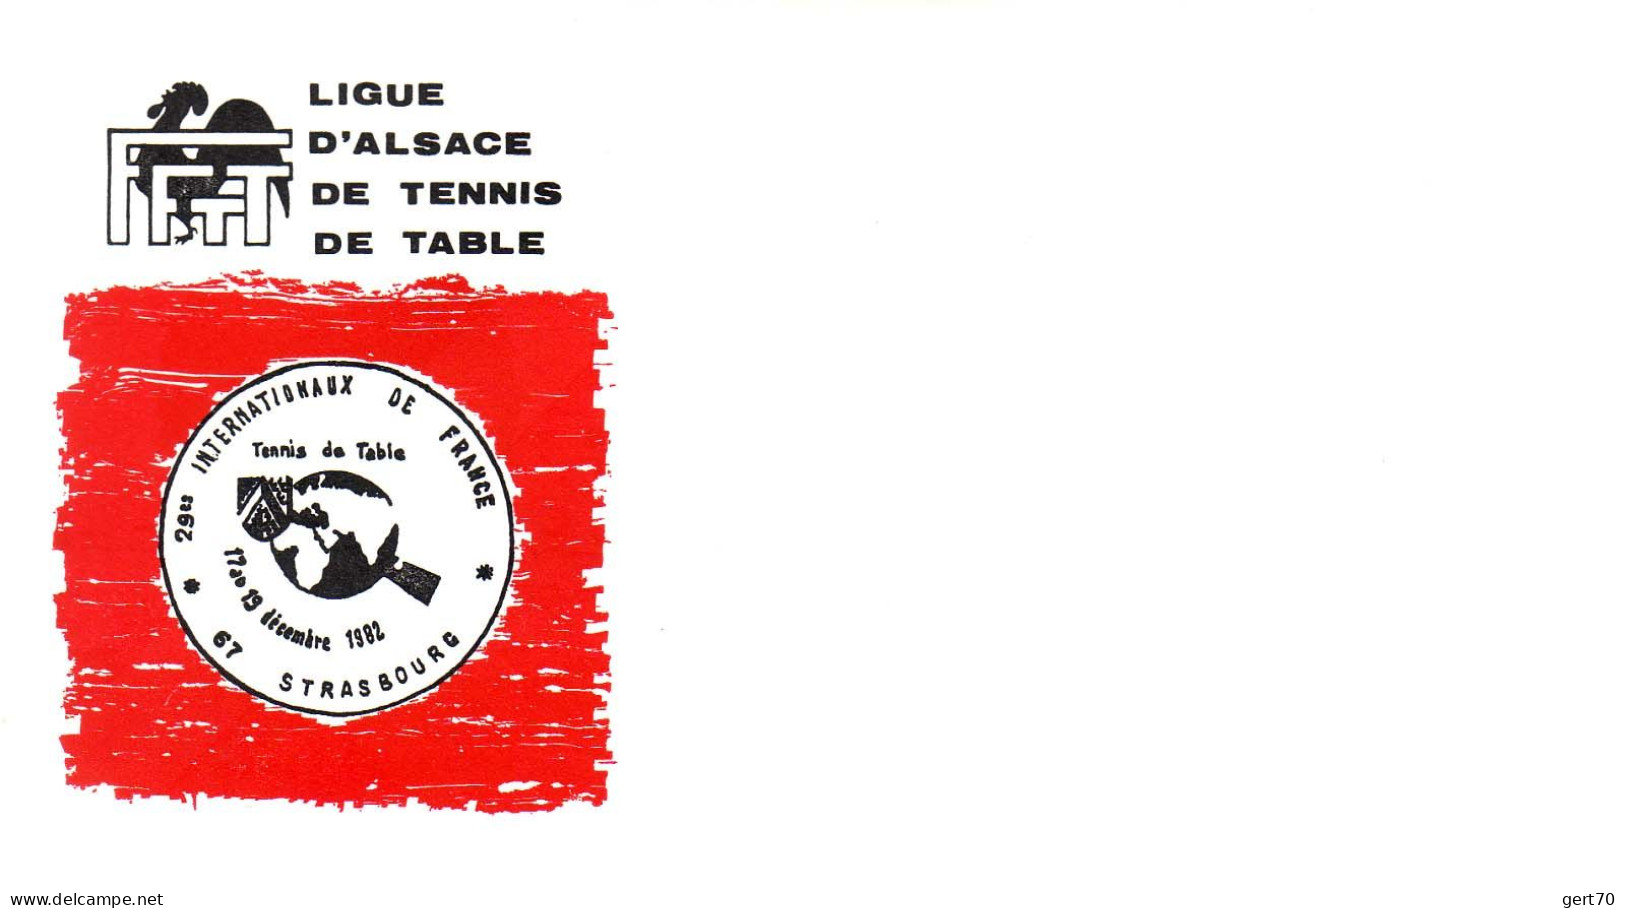 France 1982, Mint Cover / Enveloppe Vierge / French Open / Strasbourg - Tennis De Table